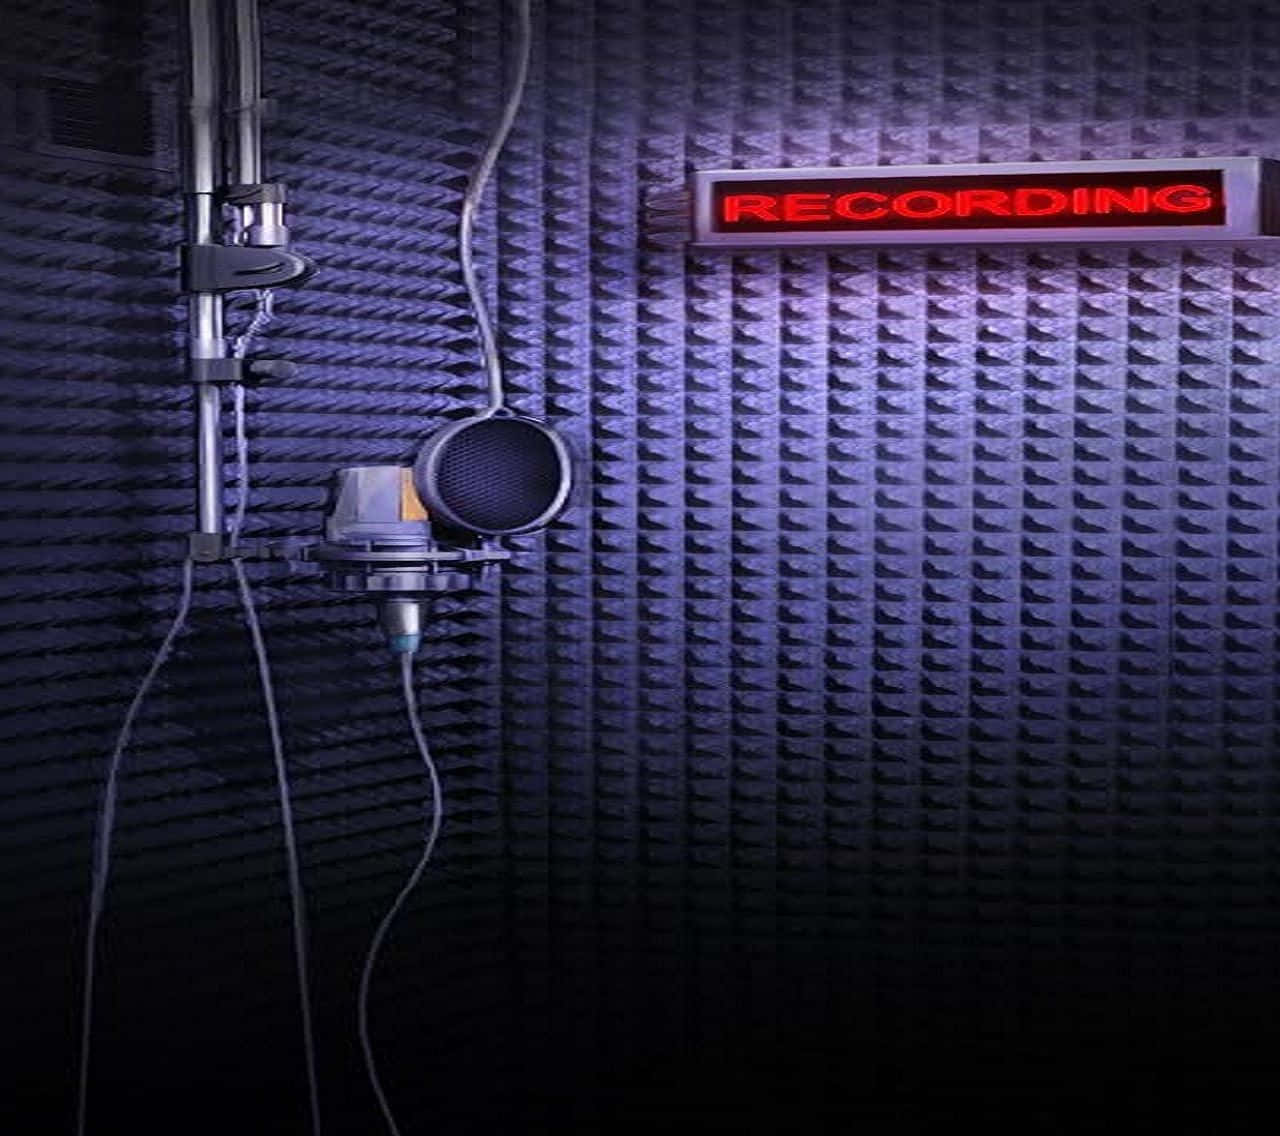 A Recording Studio With A Microphone And A Recording Sign